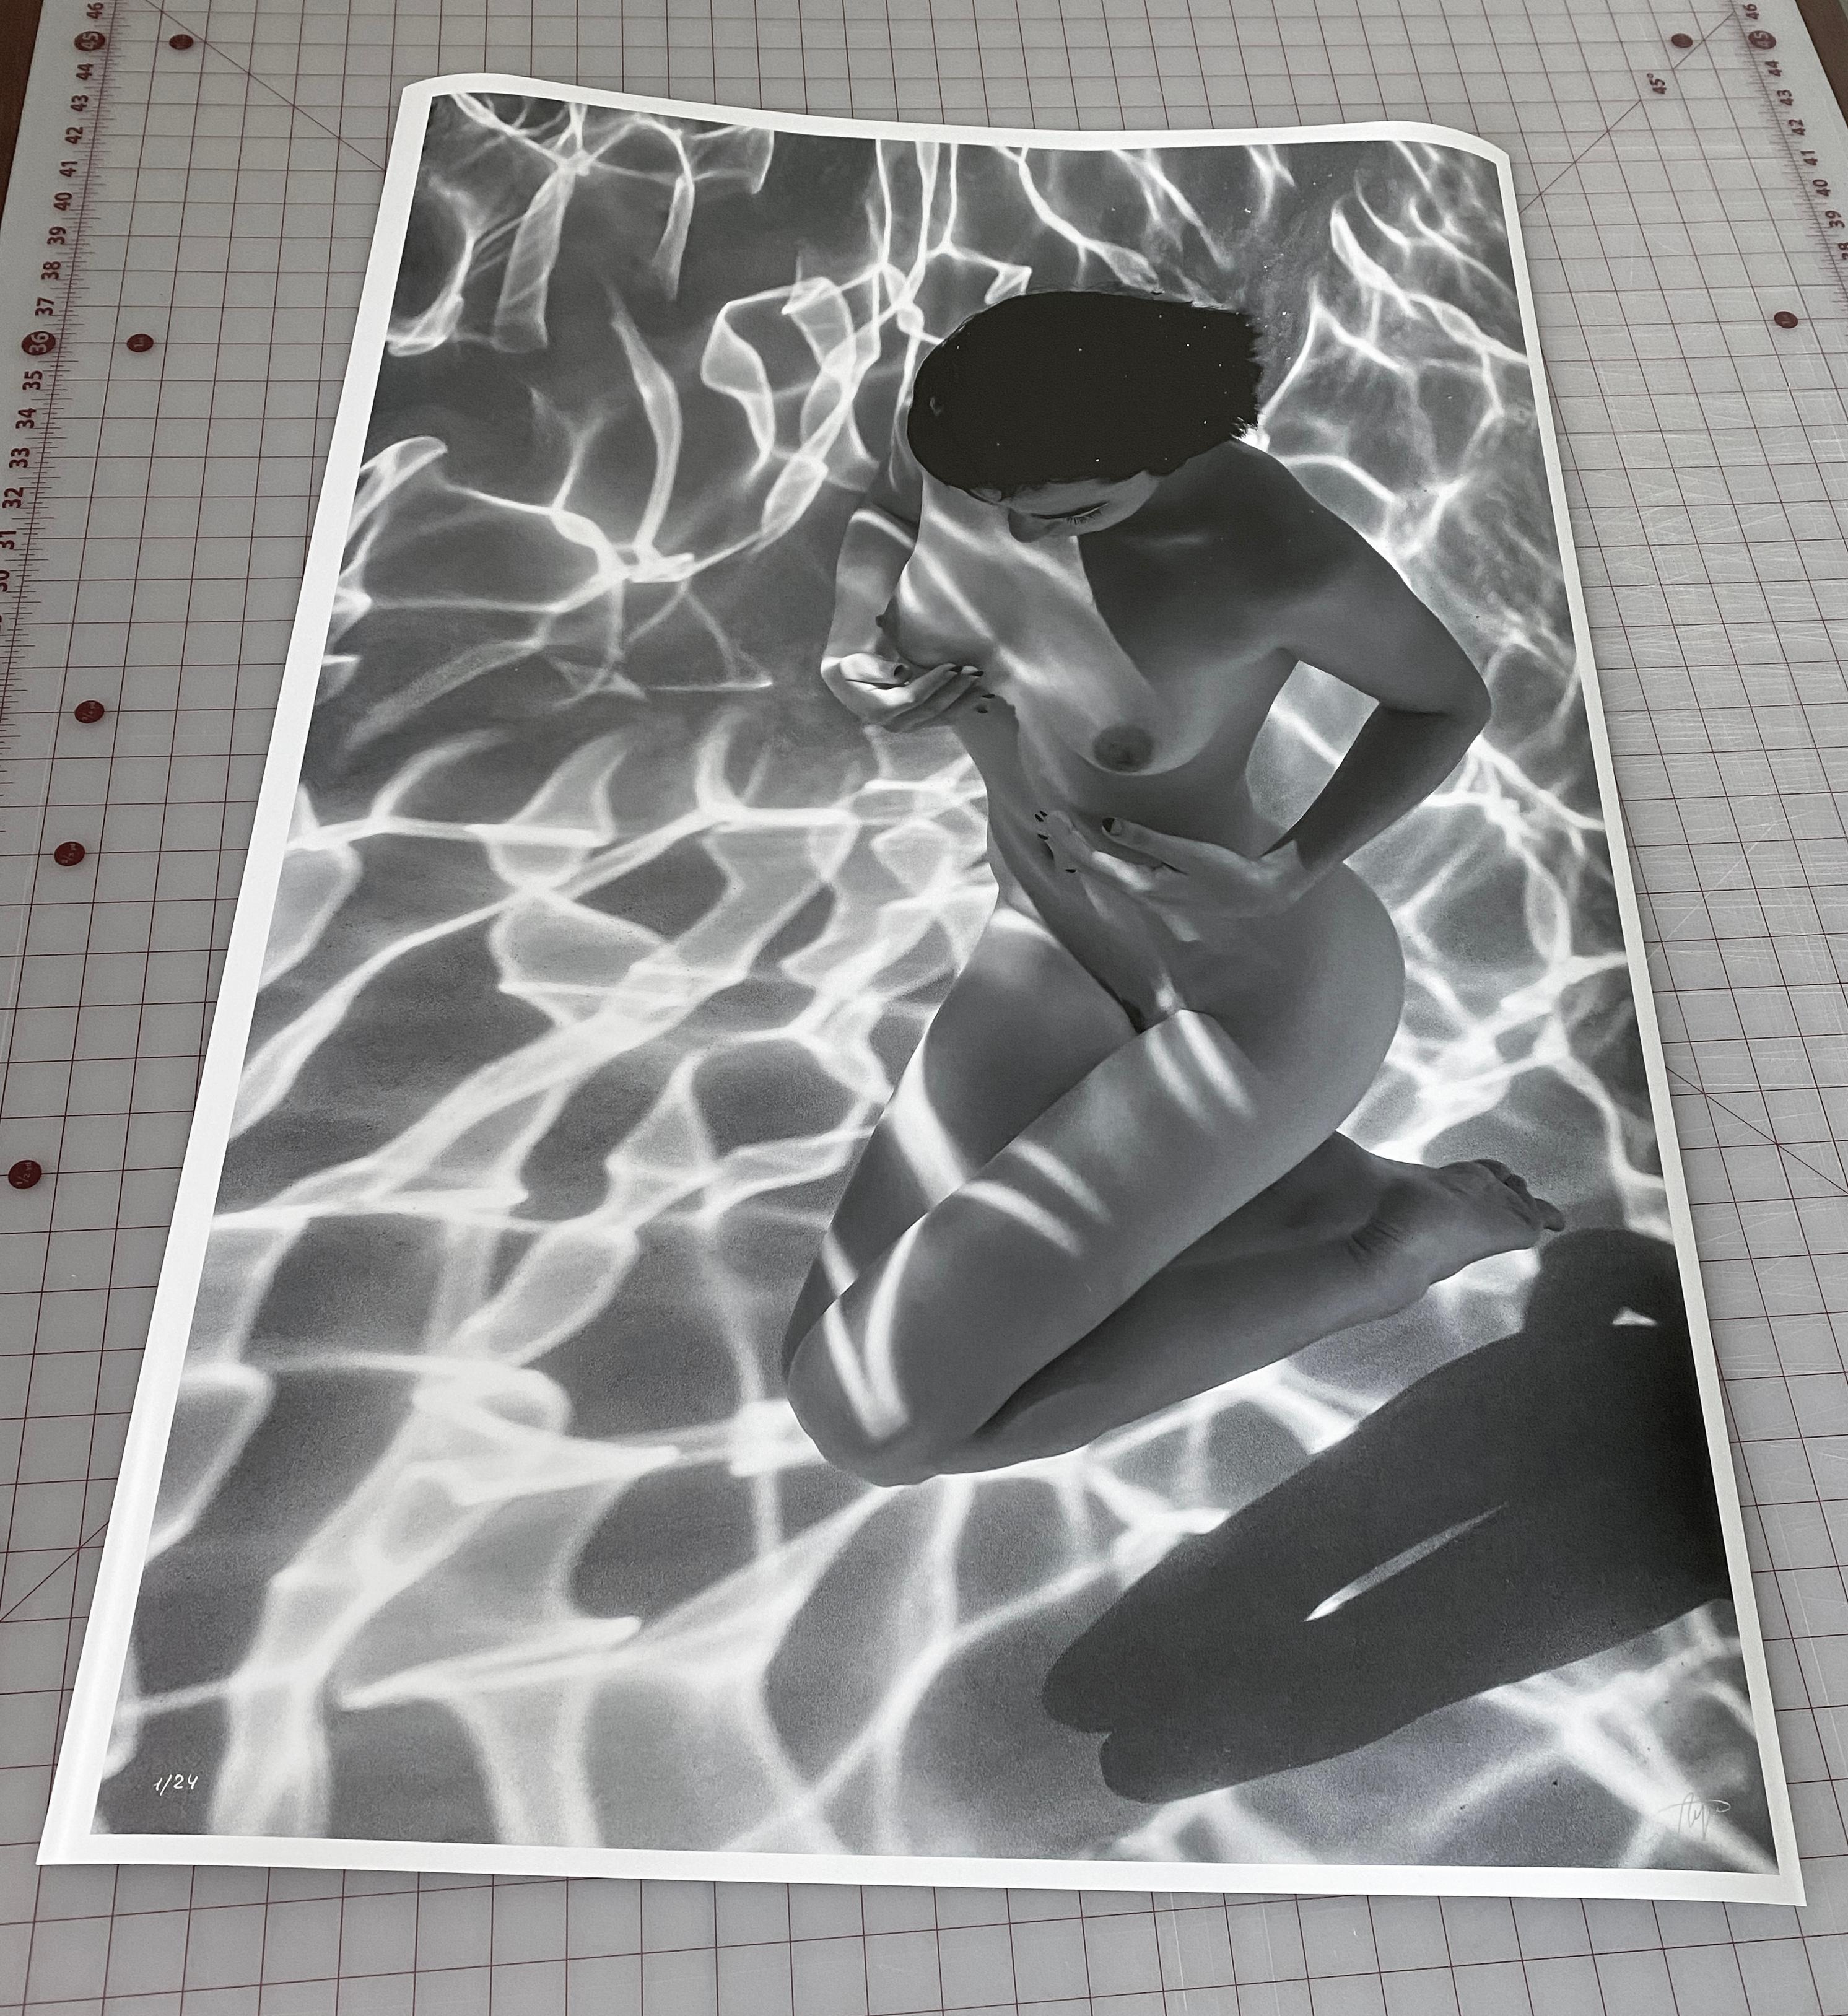 An underwater black and white photograph of a beautiful naked model on her knees at the bottom of the pool.

Original gallery quality archival pigment print signed by the artist.
Limited edition of 24.
The artwork is furnished with certificate of